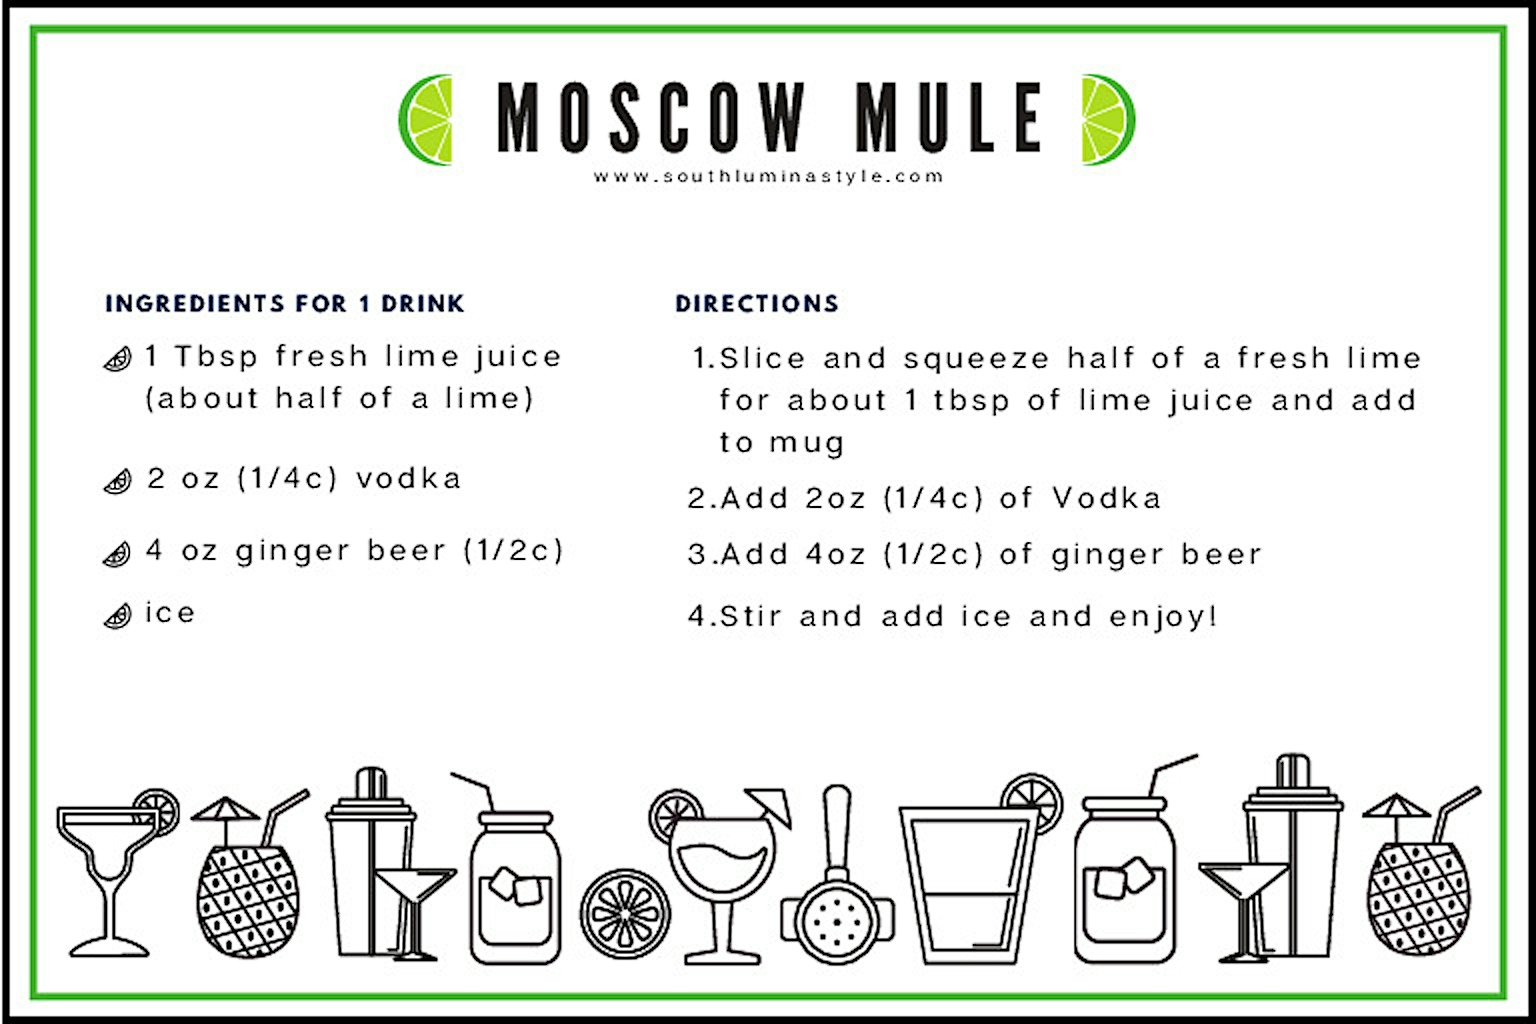 moscow mule recipe card South Lumina Style